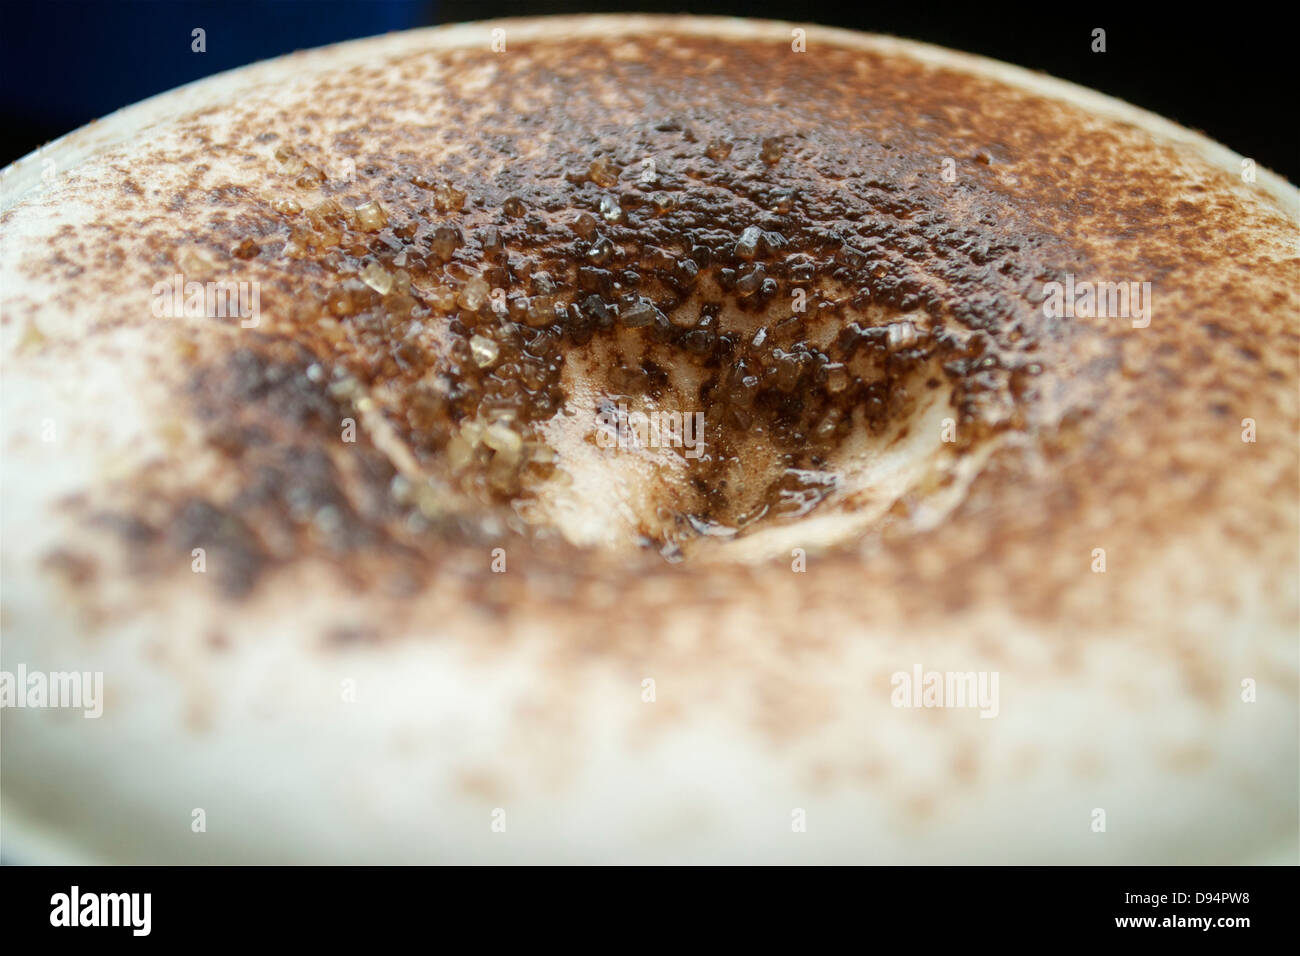 Sugar melting into froth of a cappuccino Stock Photo